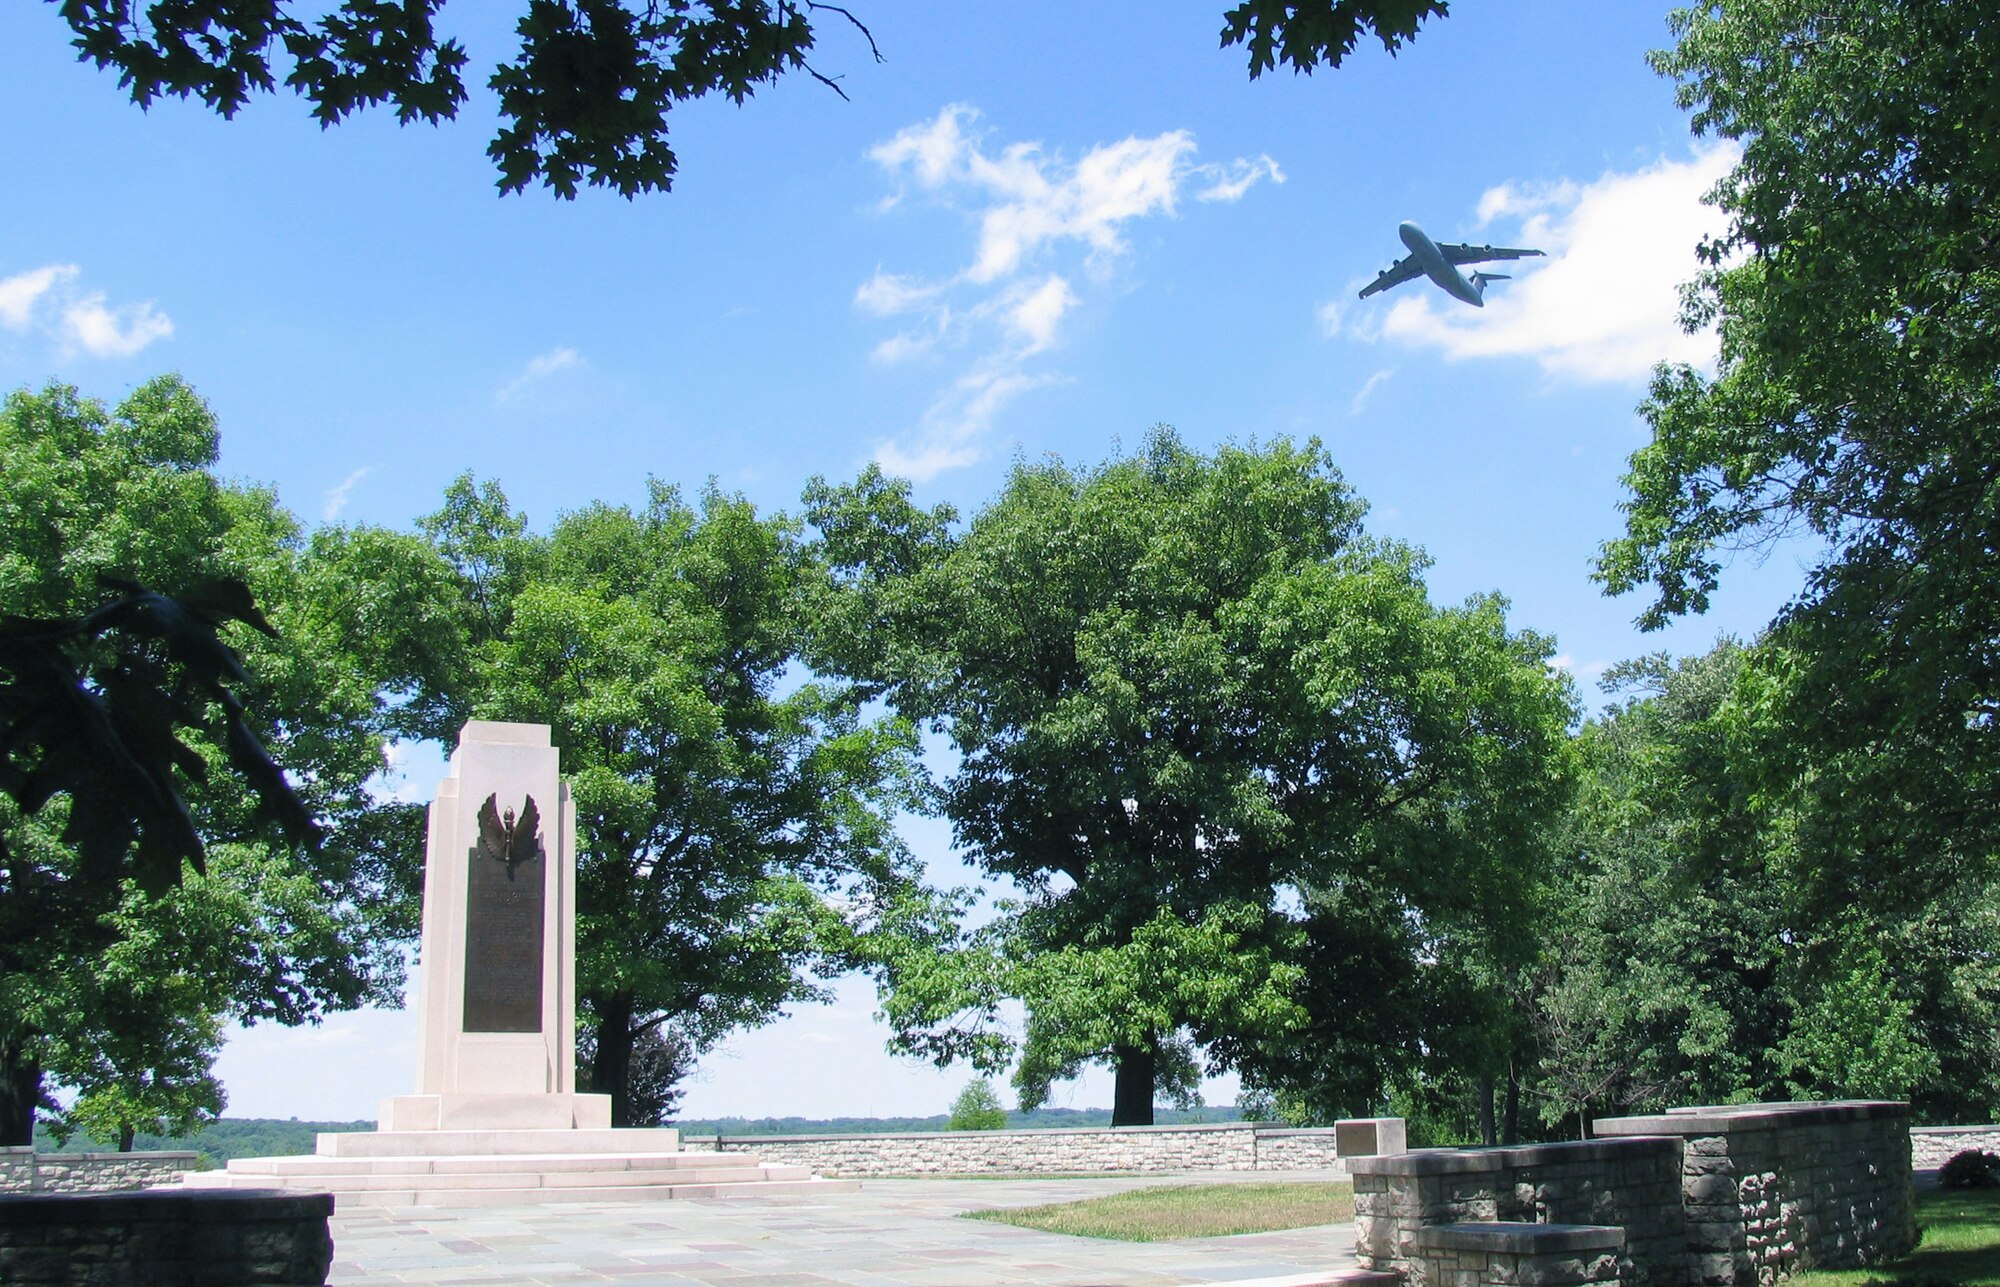 A C-5 Galaxy flies over the Wright Brothers Memorial, which overlooks the main runway at Wright-Patterson Air Force Base, Ohio. Dedicated in 1940, the memorial commemorates the contributions of Dayton inventors Orville and Wilbur Wright to manned powered flight. It is now part of the Dayton Aviation Heritage National Historic Park. Air Force and Park Service officials are planning a ceremony at the memorial Dec. 17, 2010 to celebrate the Wright's first successful powered flight. (Photo courtesy National Park Service) 